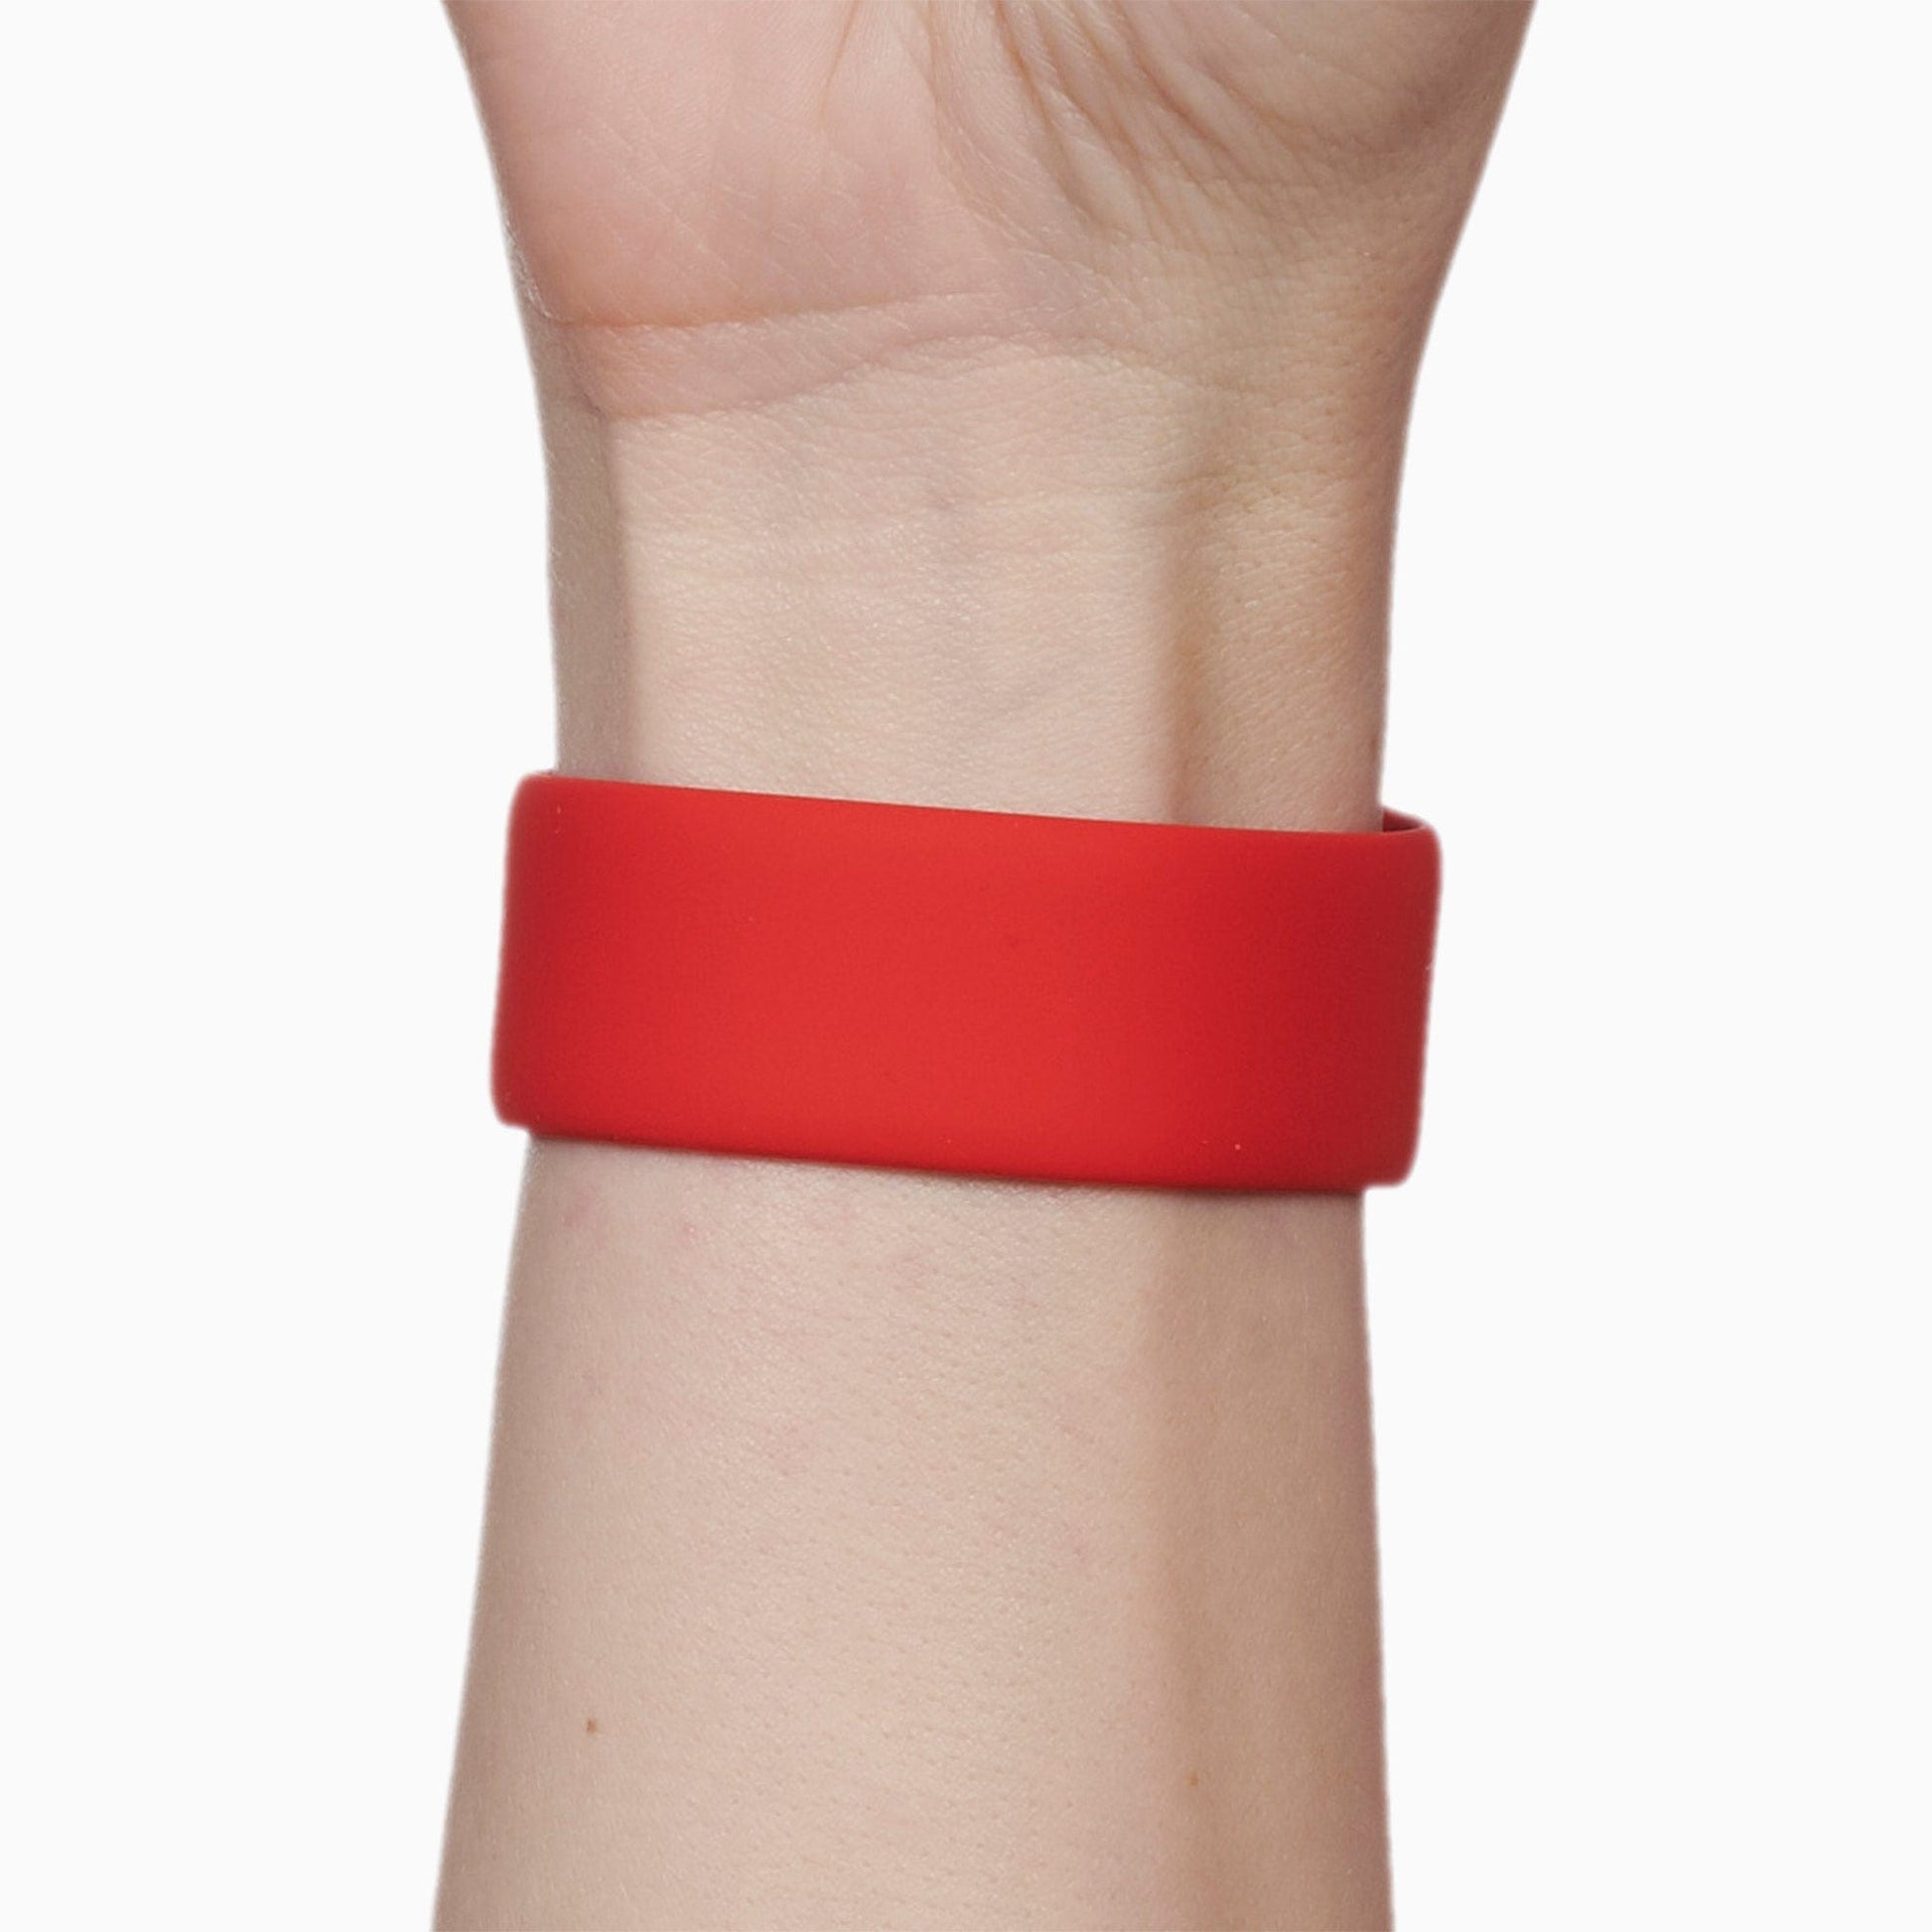 Red Solo Loop for Apple Watch